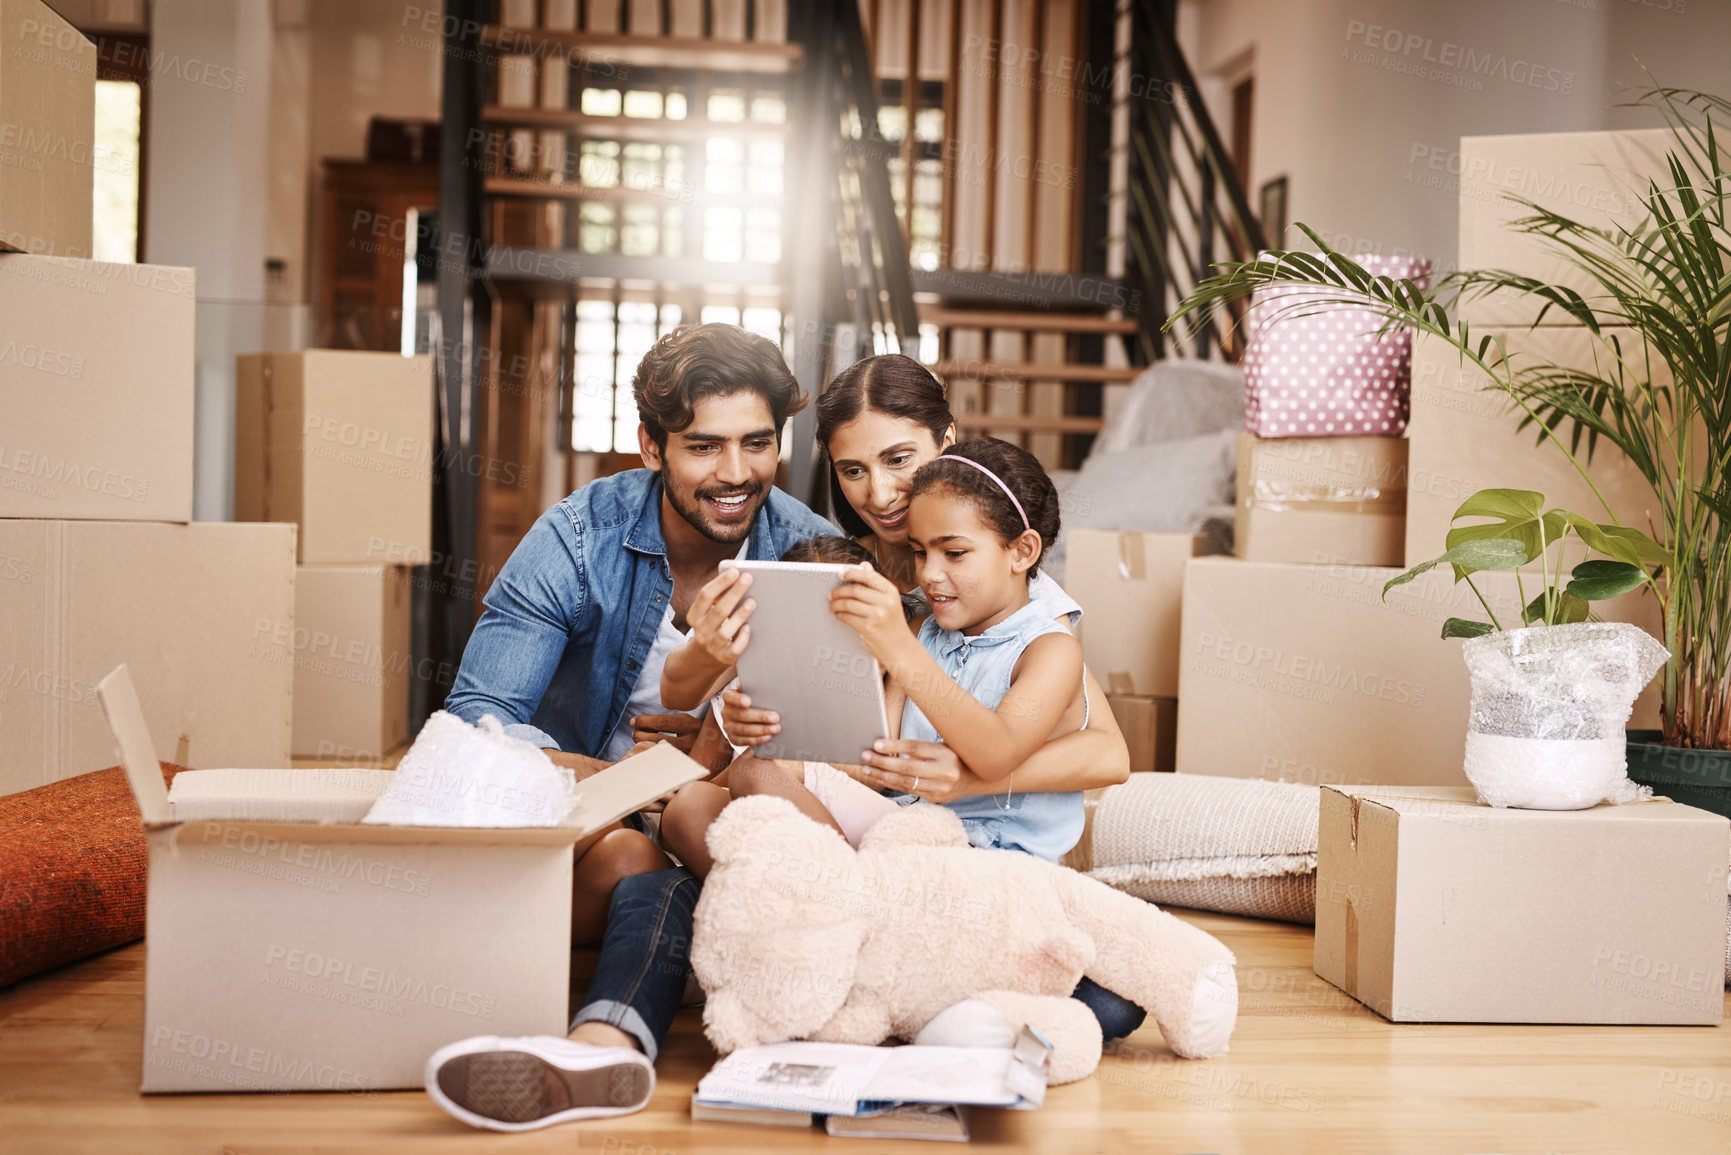 Buy stock photo Full length shot of an affectionate young family unpacking their boxes on moving day